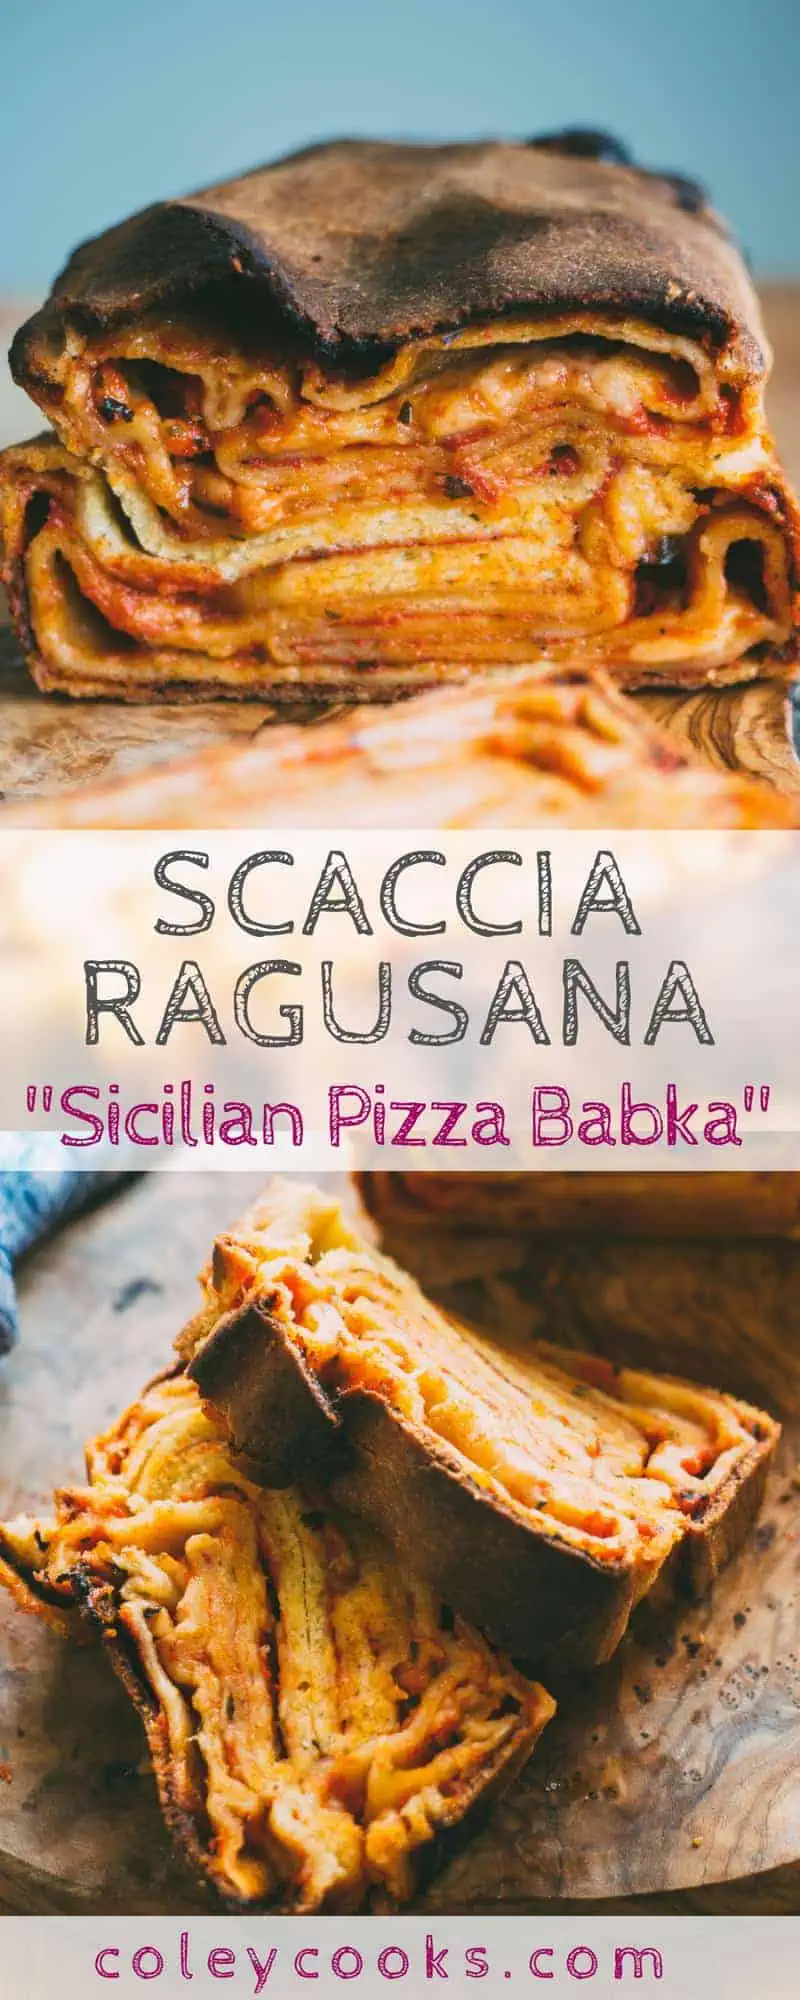 SCACCIA RAGUSANA: Sicilian "Pizza Babka" | Stromboli meets lasagne meets meets pizza meets babka. This incredible Sicilian bread recipe is filled with tomato sauce, cheese, and anything else you want. #Sicilian #pizza #babka #stromboli #bread 